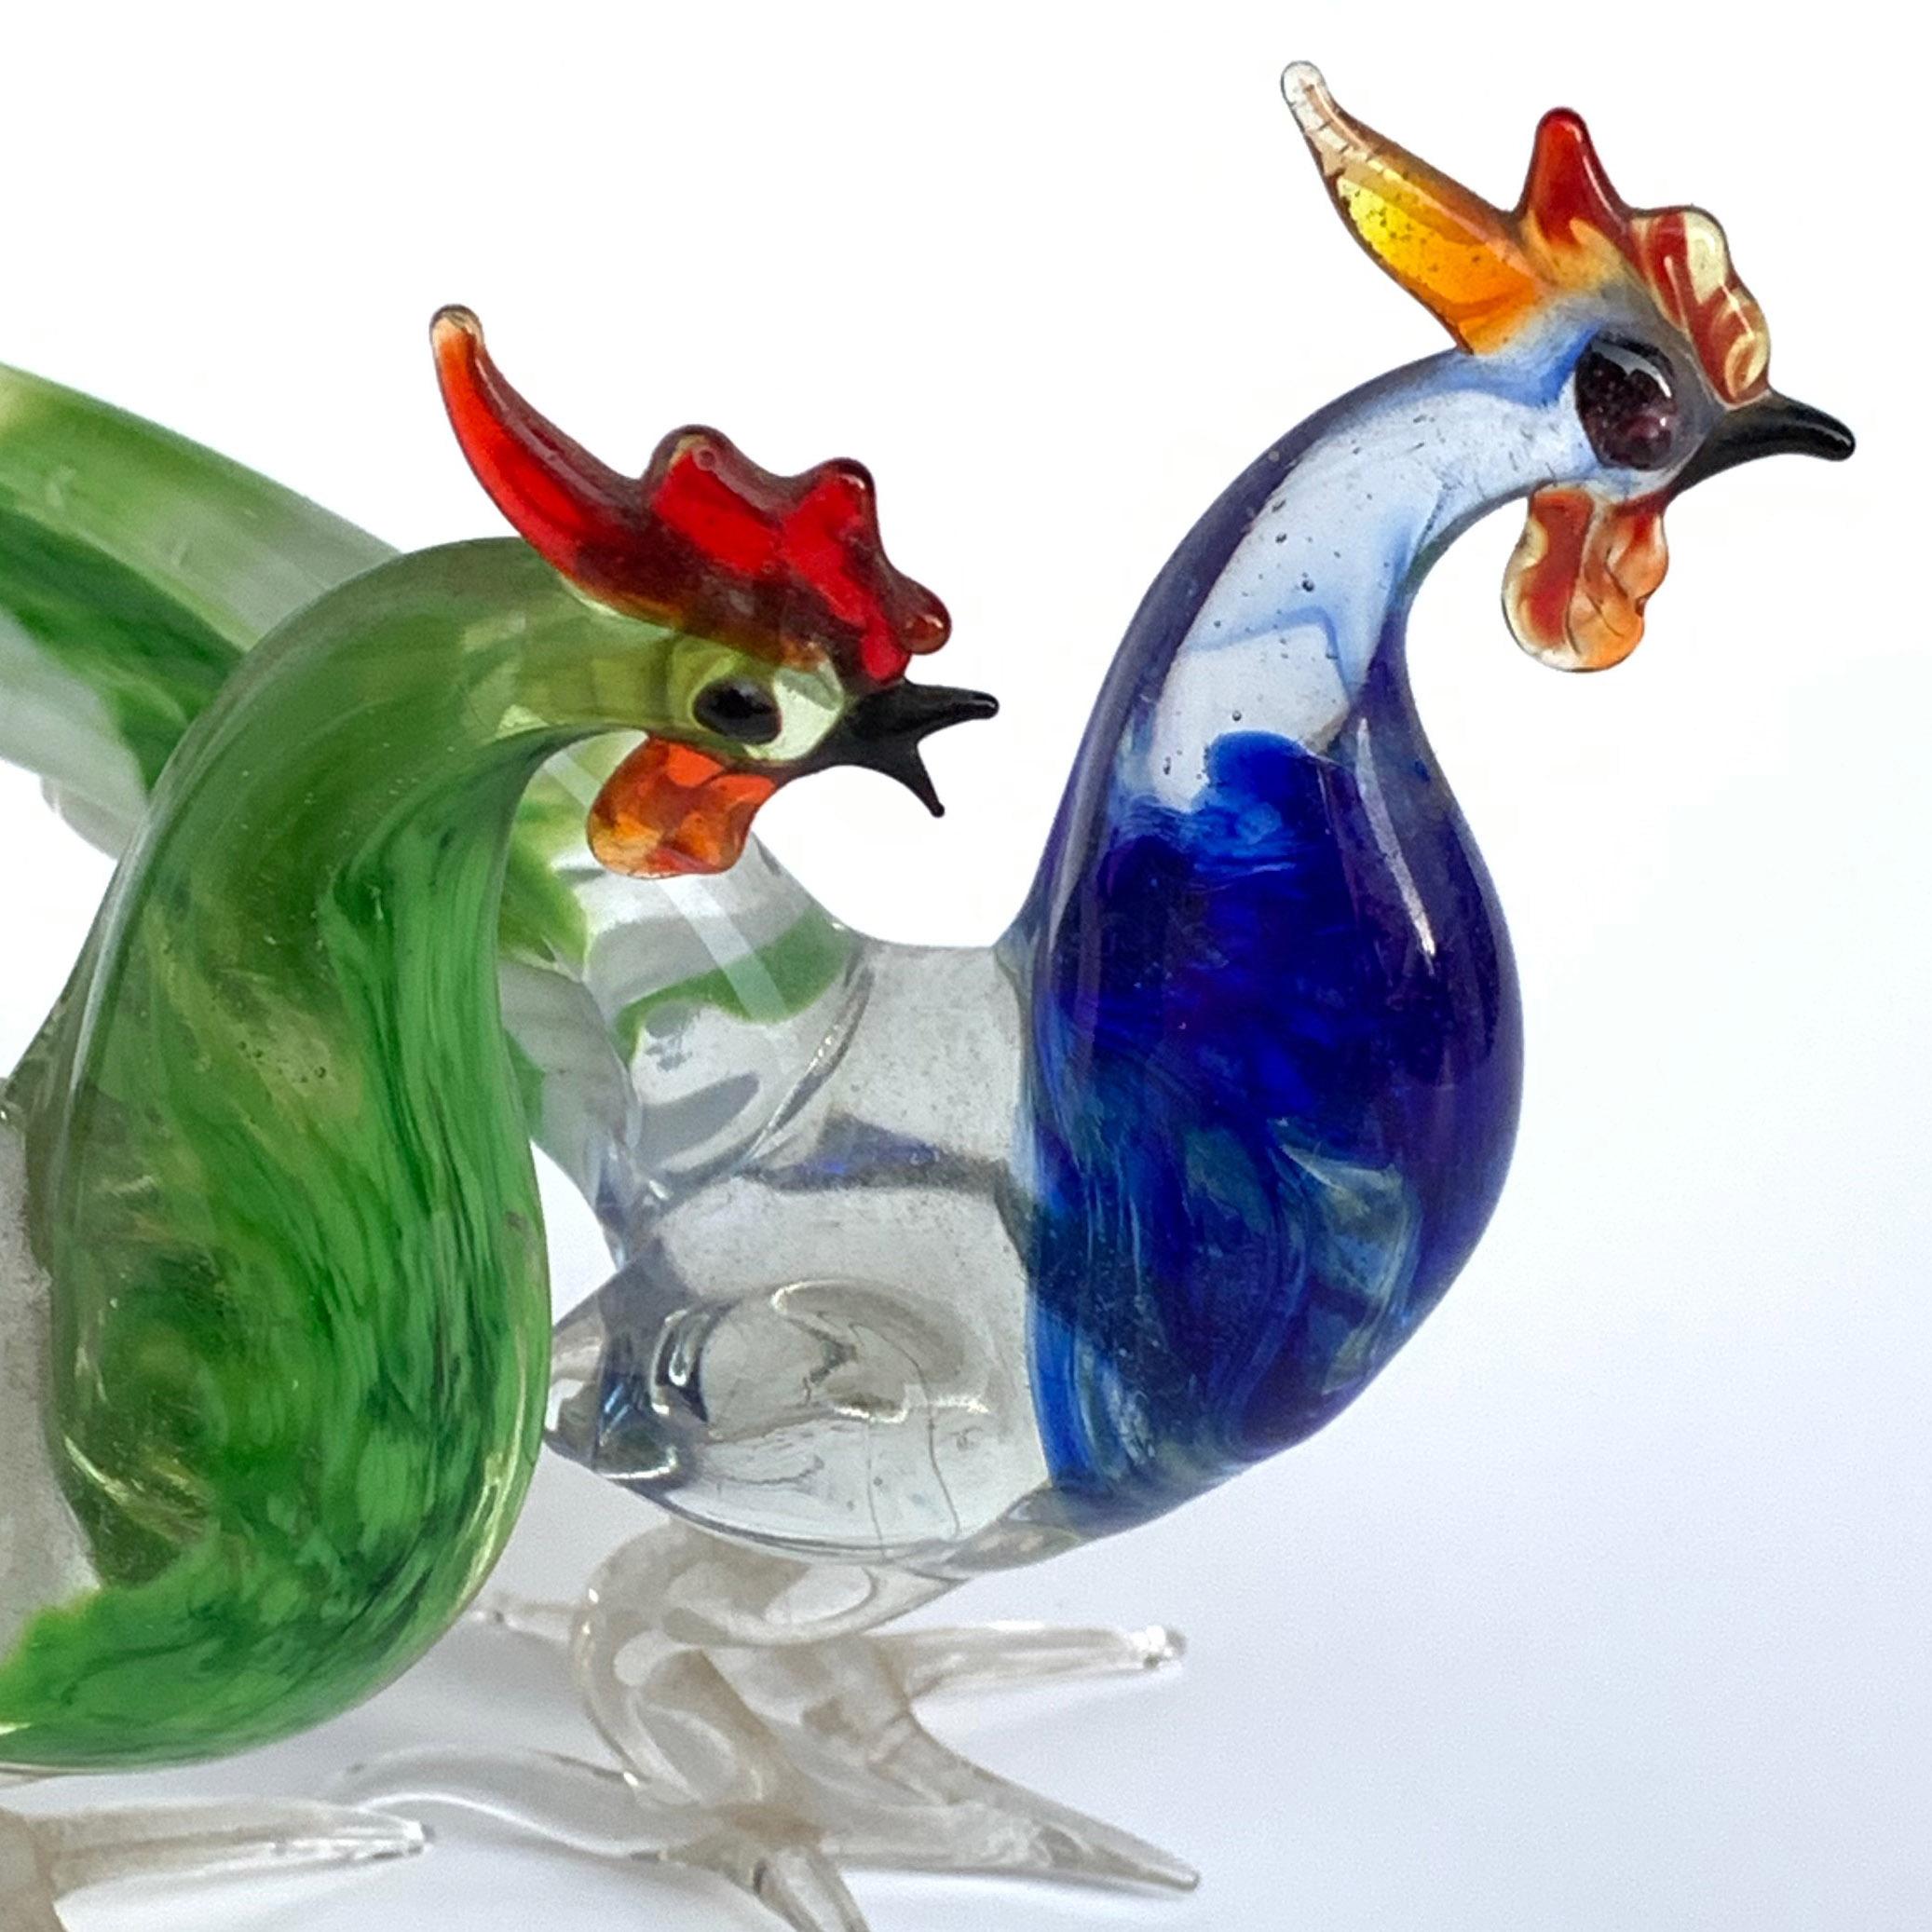 Murano glass sculptures depicting a pair of roosters. Multicolored artistic glass.
Made in Italy in the 1970s.